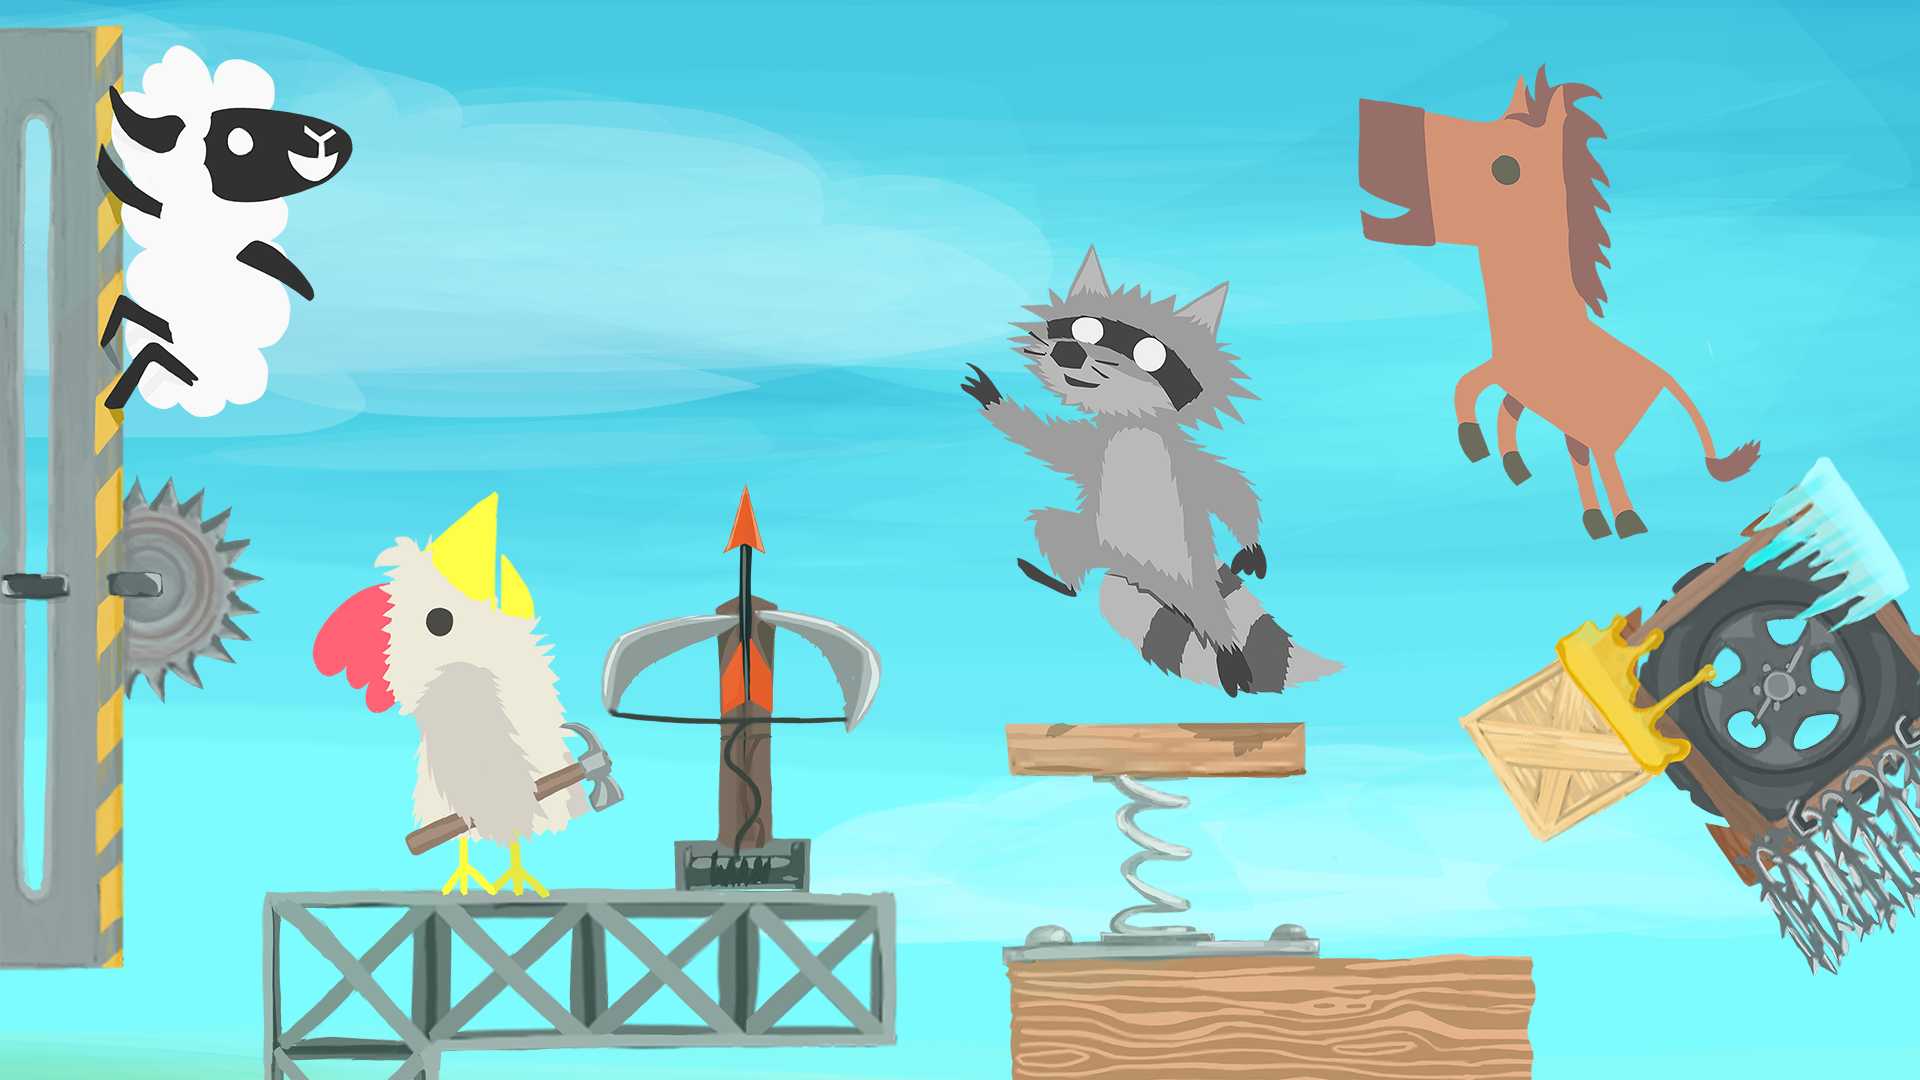 games like ultimate chicken horse